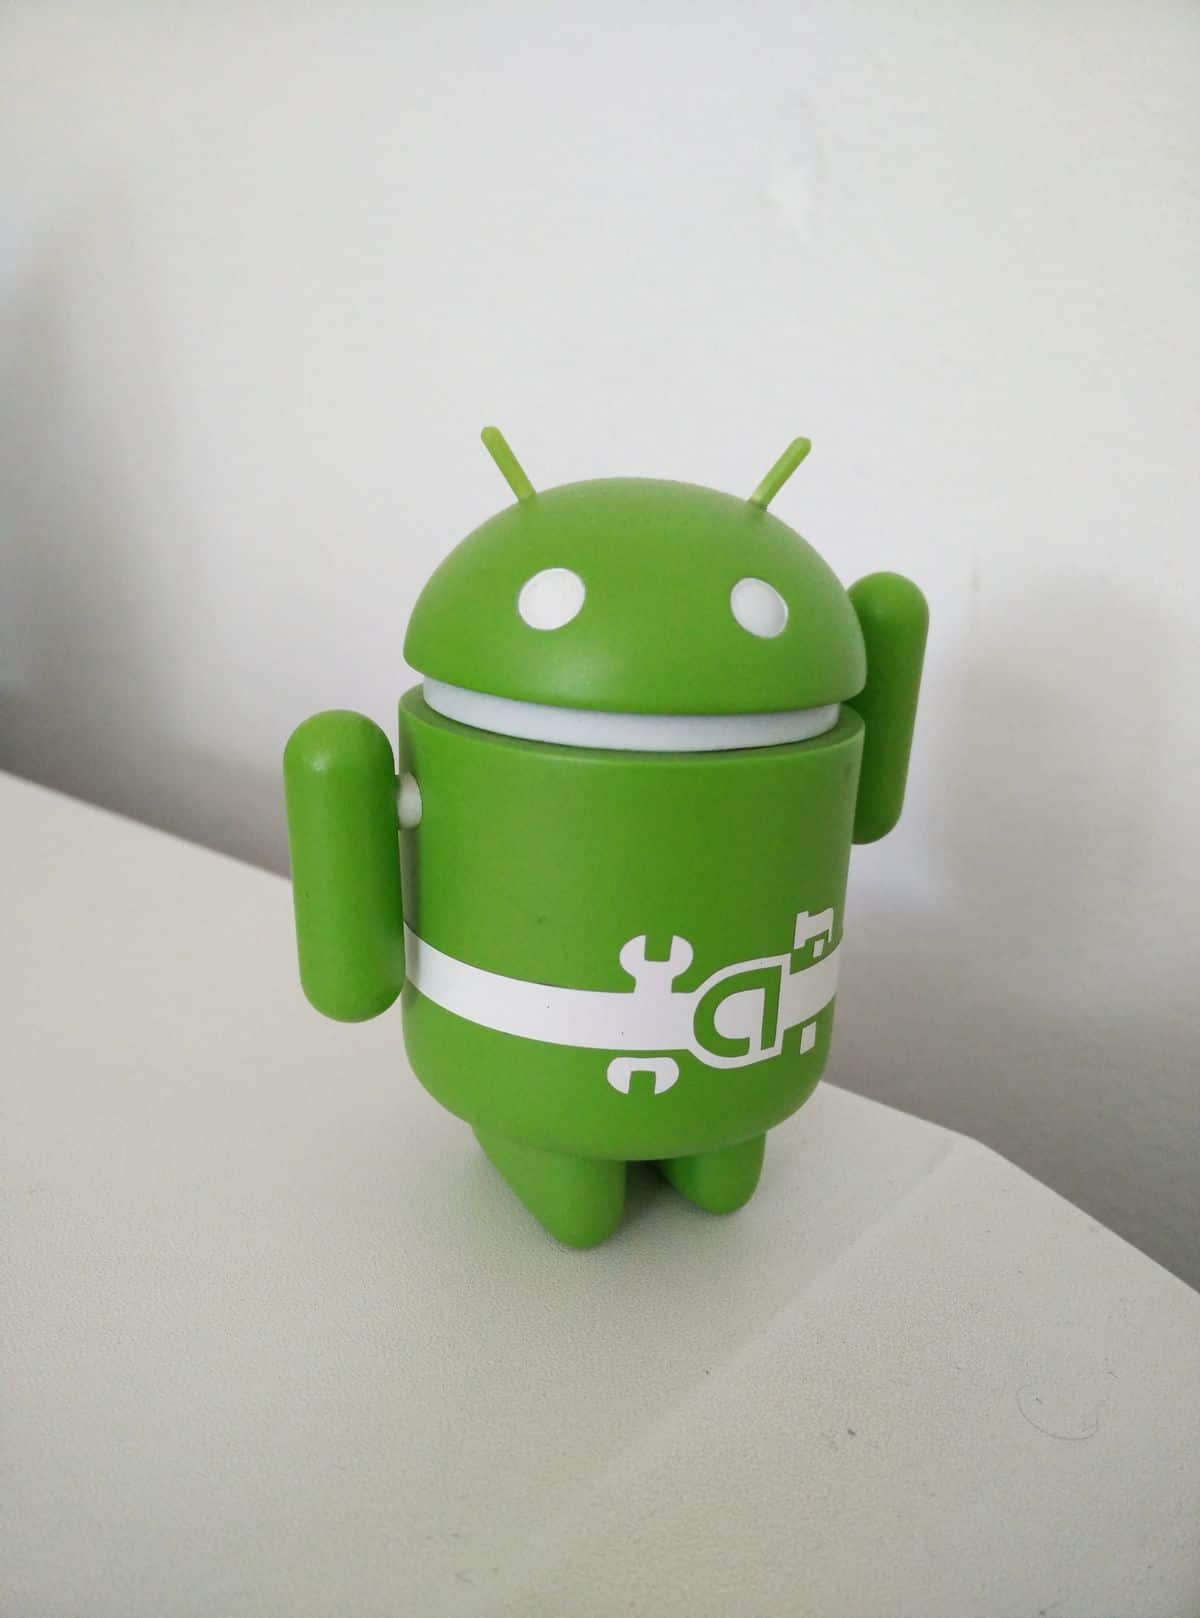 A small, green plastic Android figurine lifts one arm as though waving.